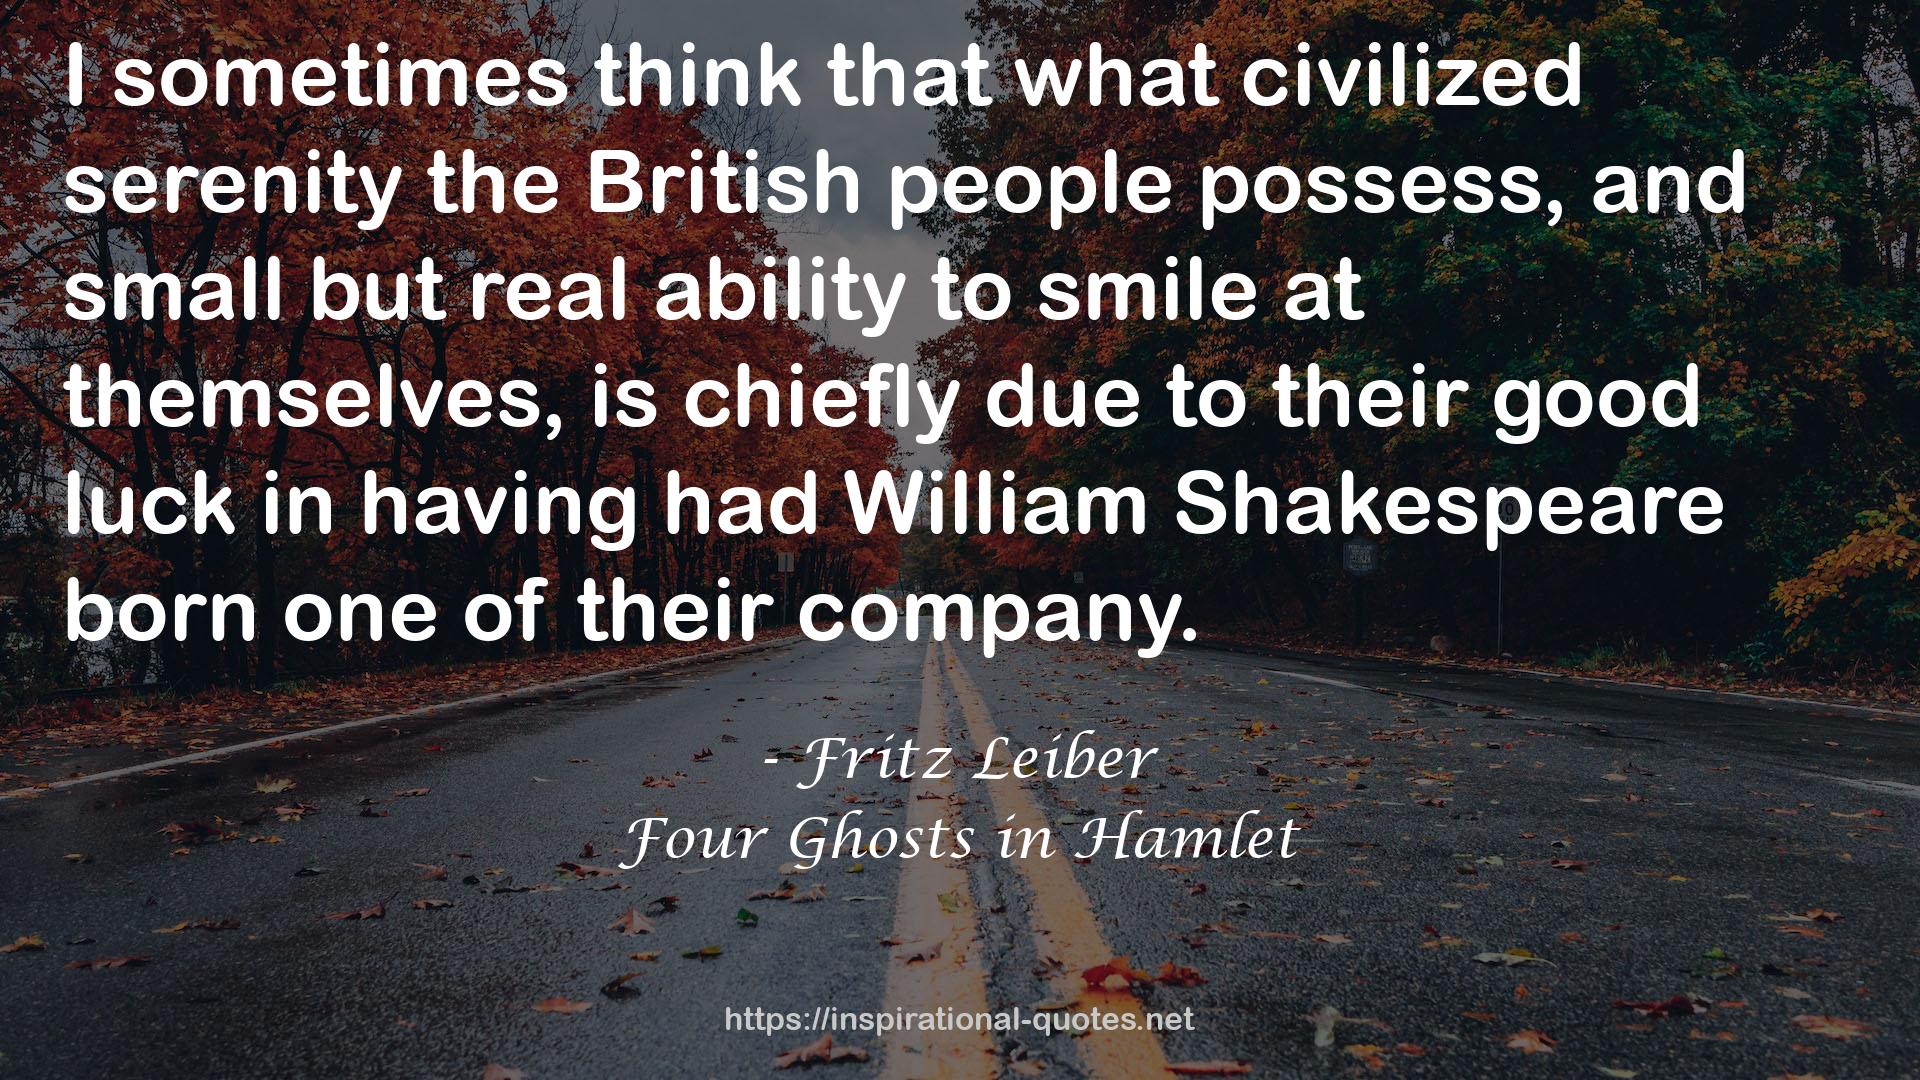 Four Ghosts in Hamlet QUOTES